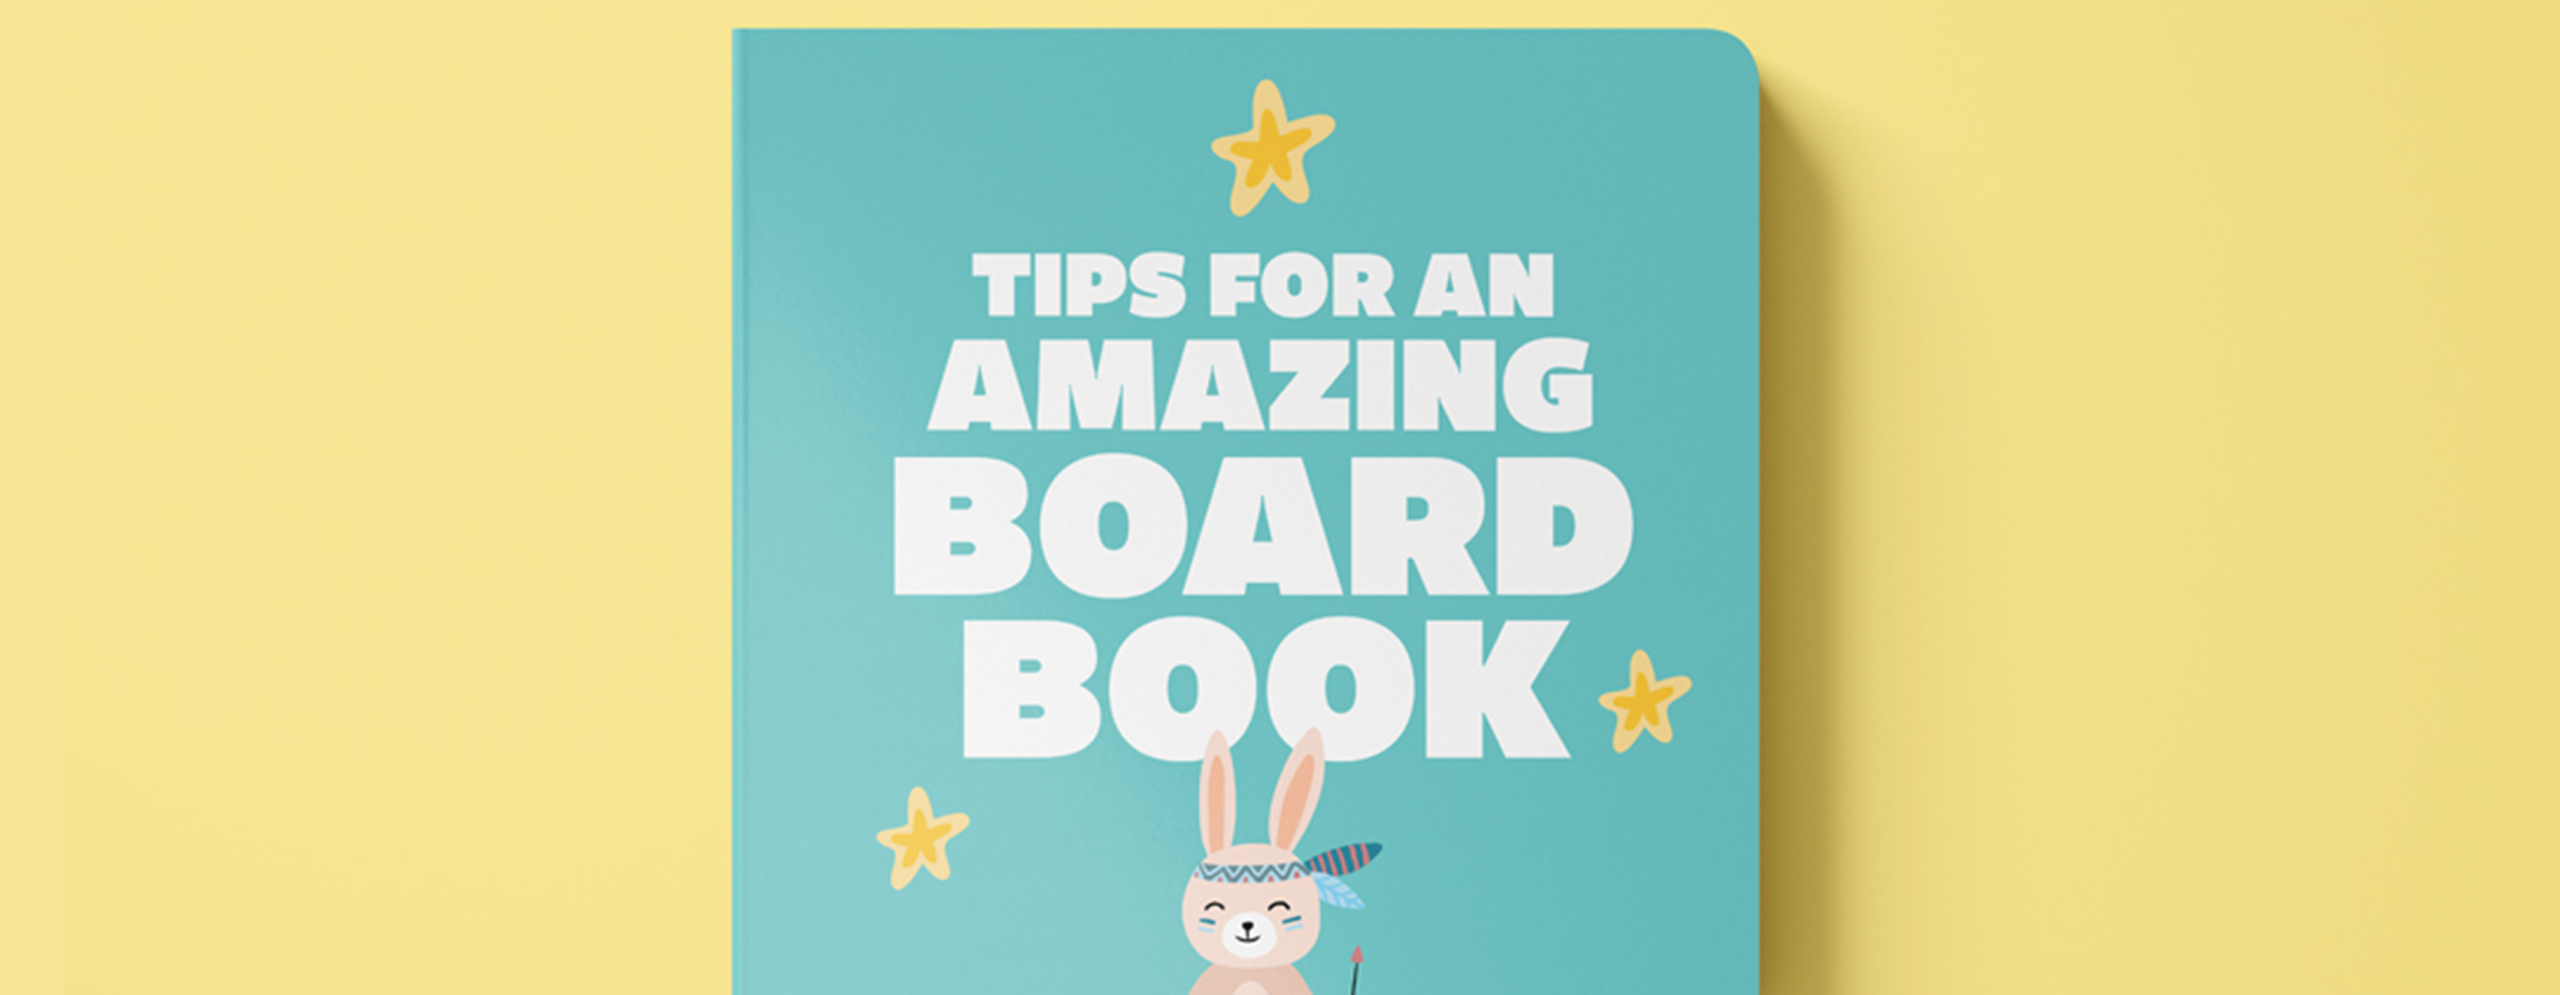 Tips for an amazing board book